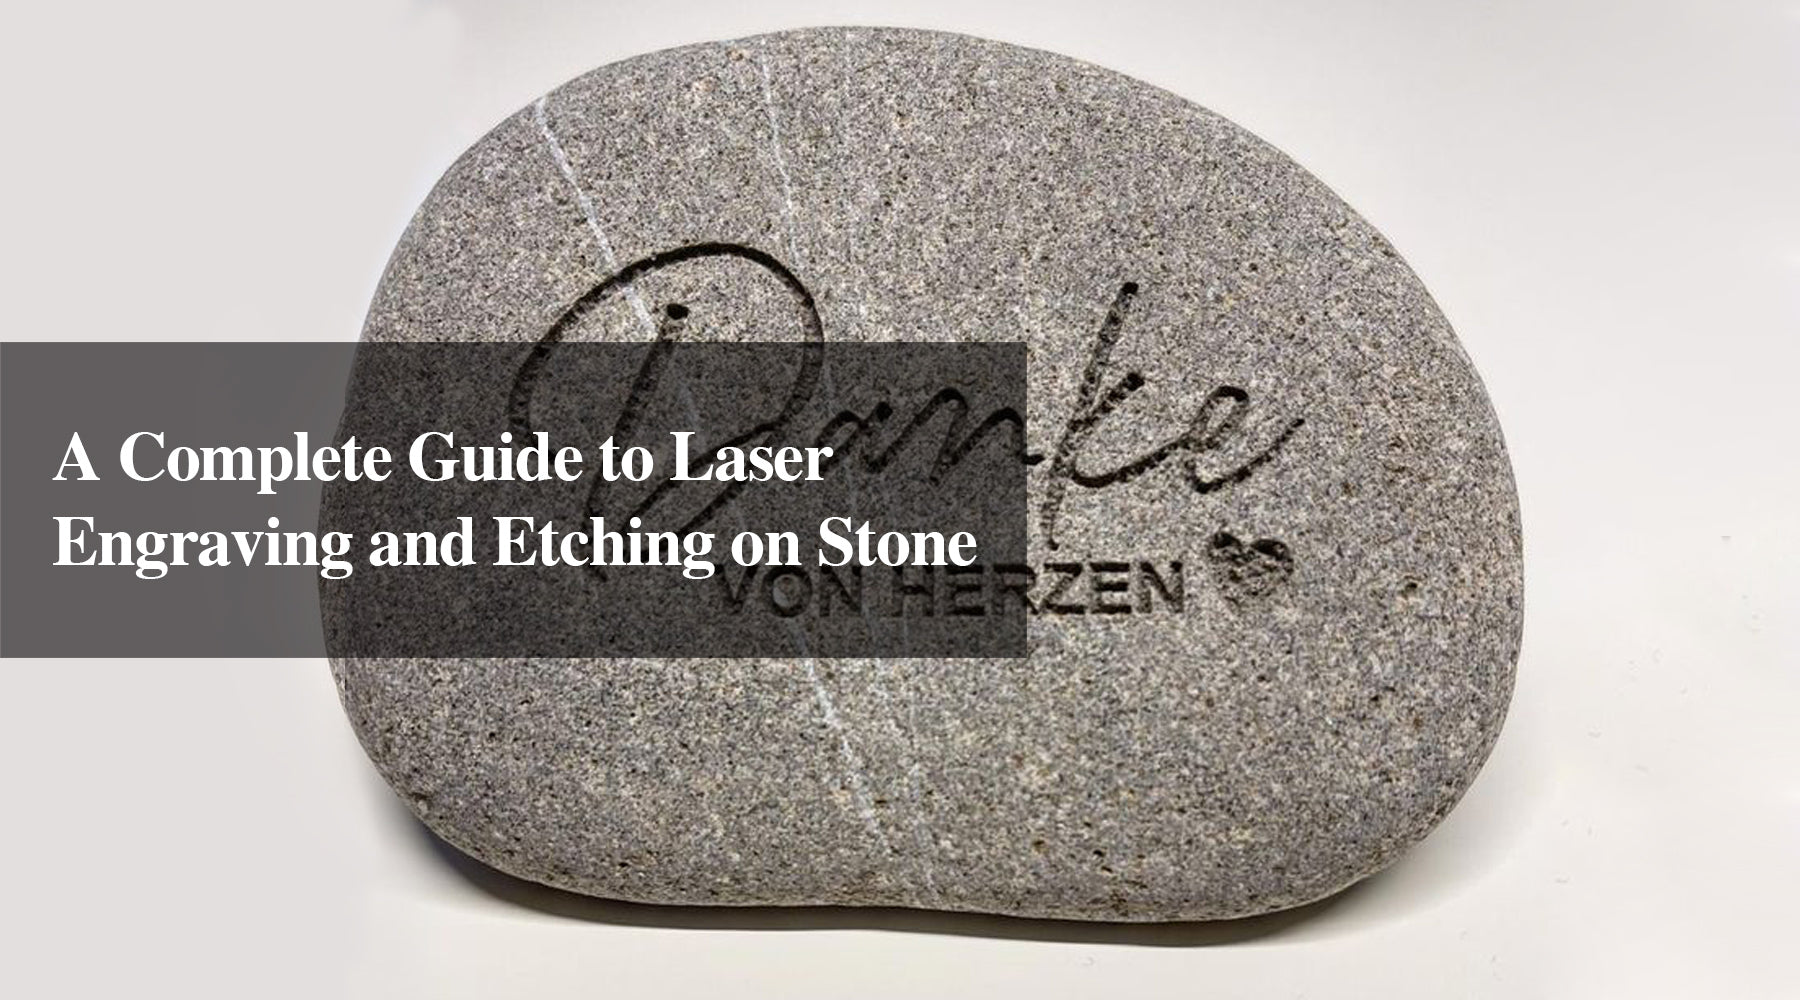 A Complete Guide to Laser Engraving and Etching on Stone